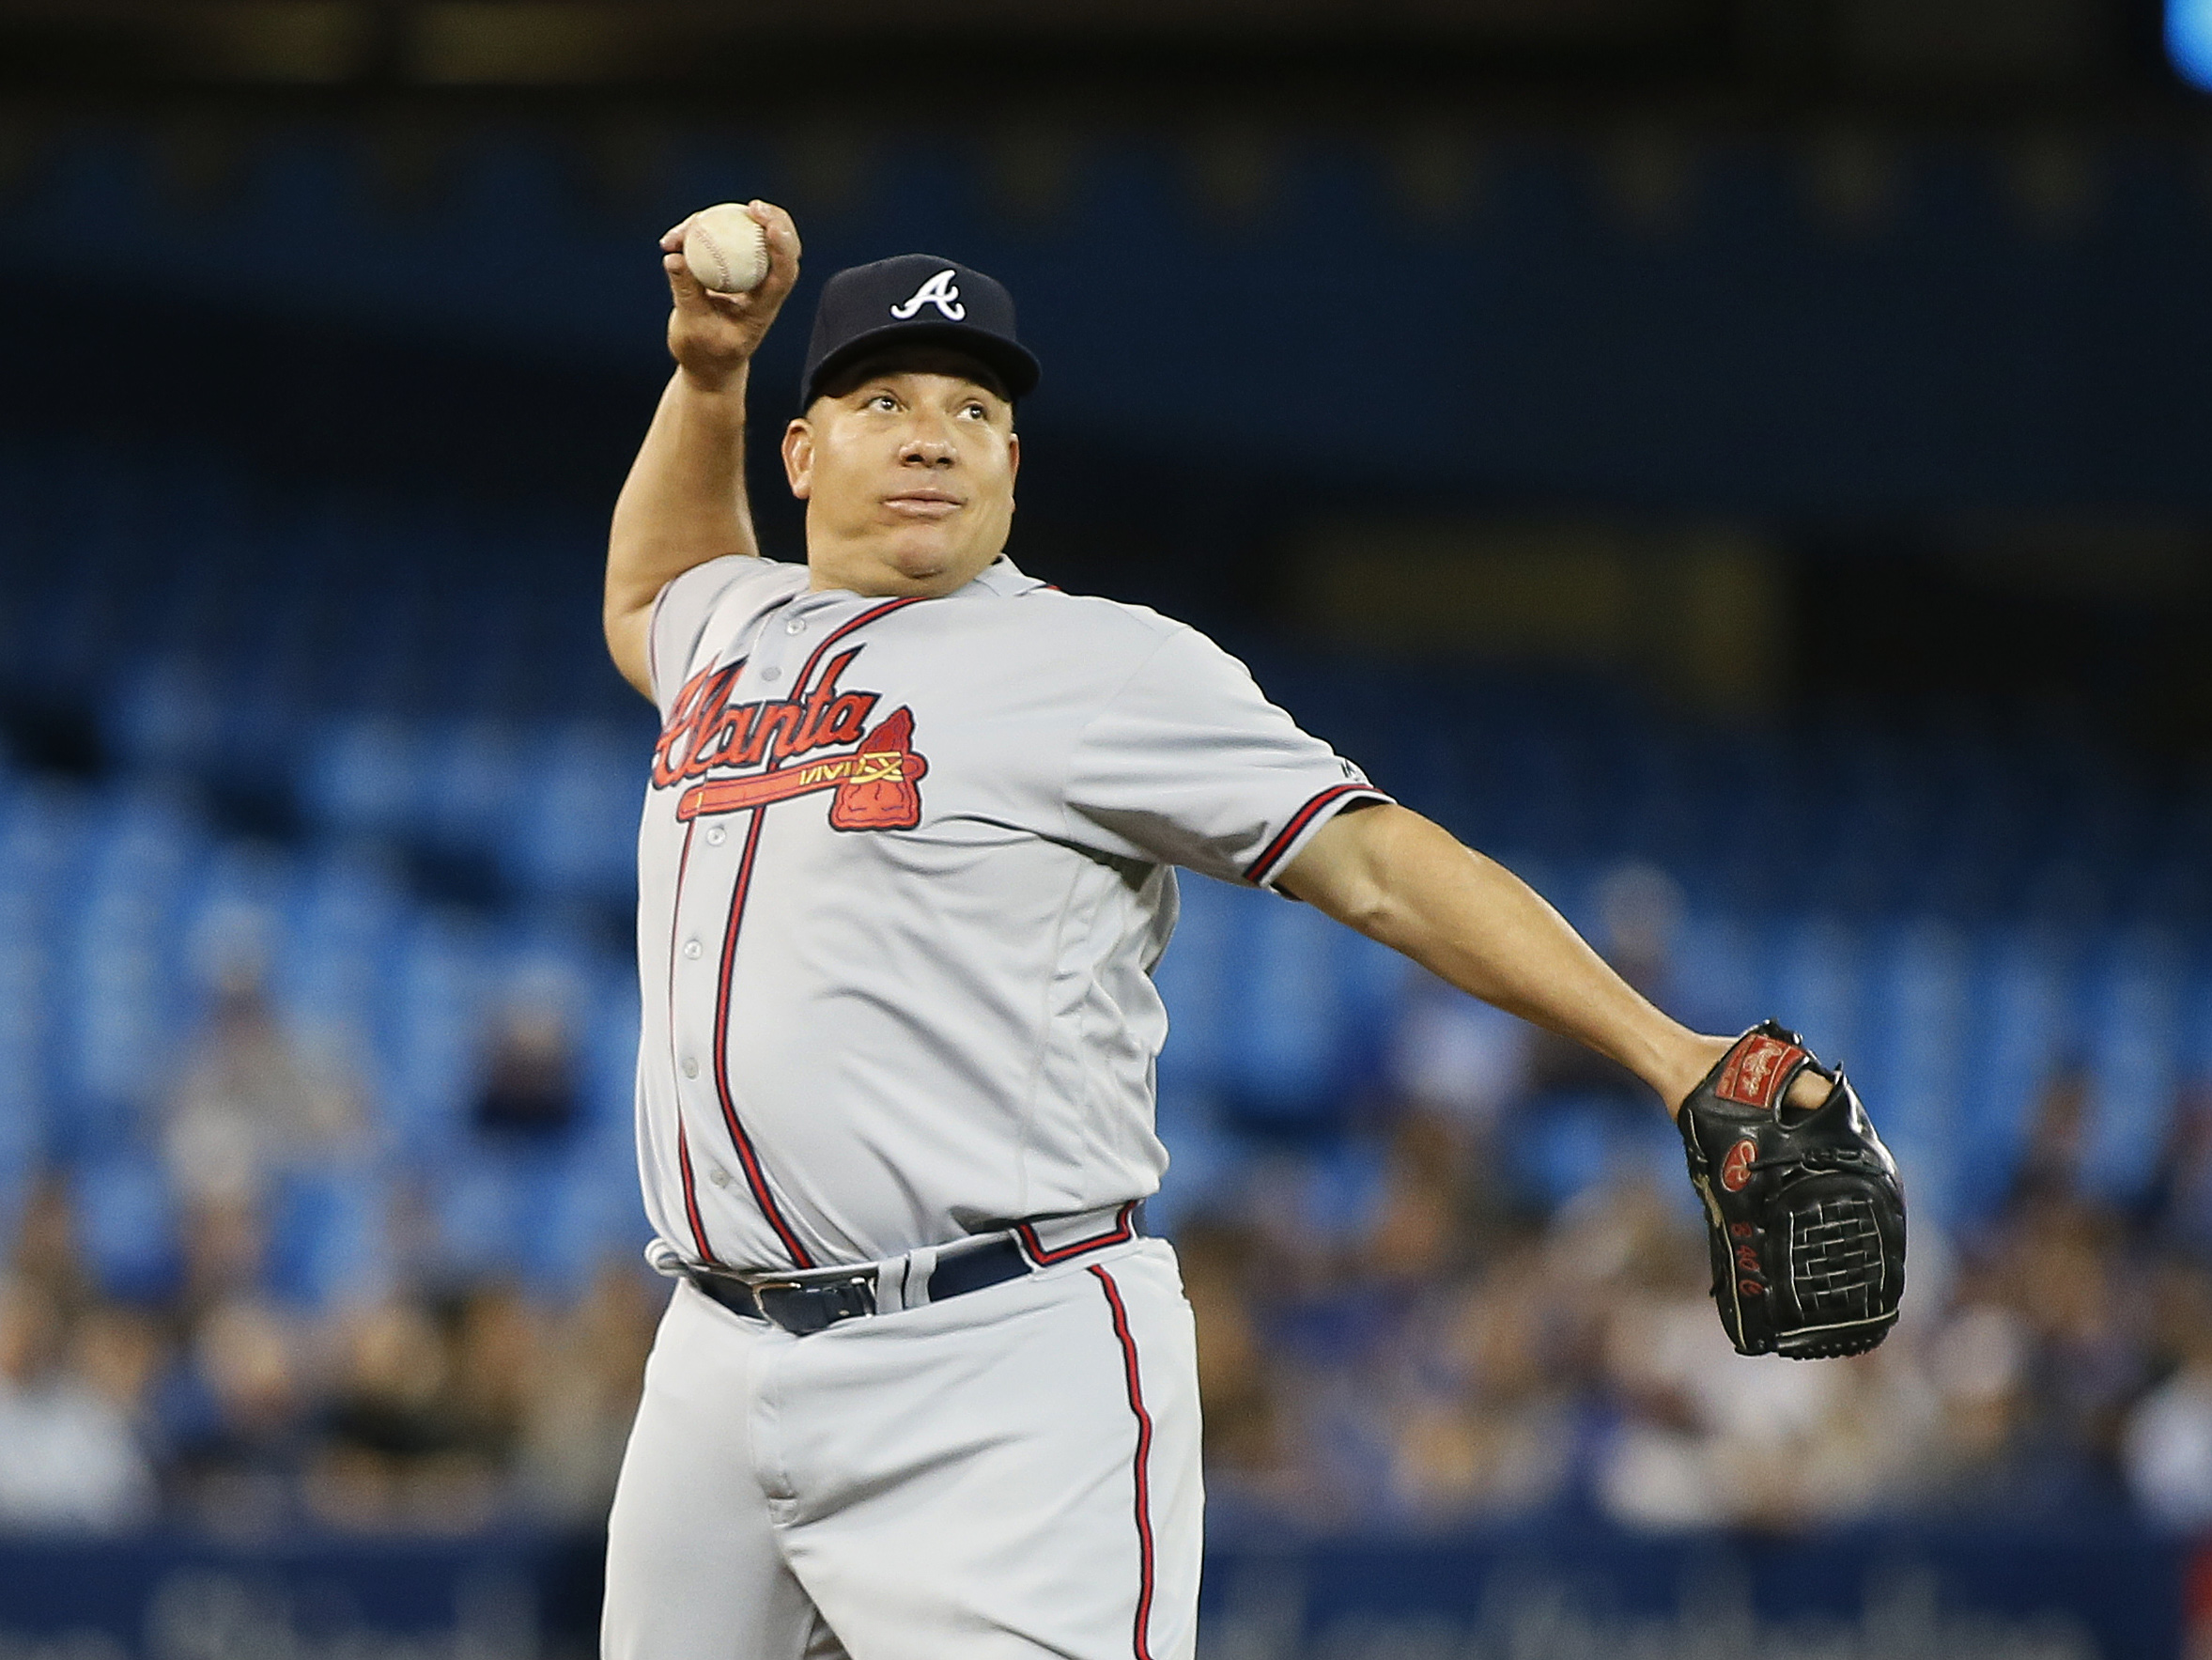 Bartolo Colon sets mark for most MLB wins by Dominican pitcher (244)